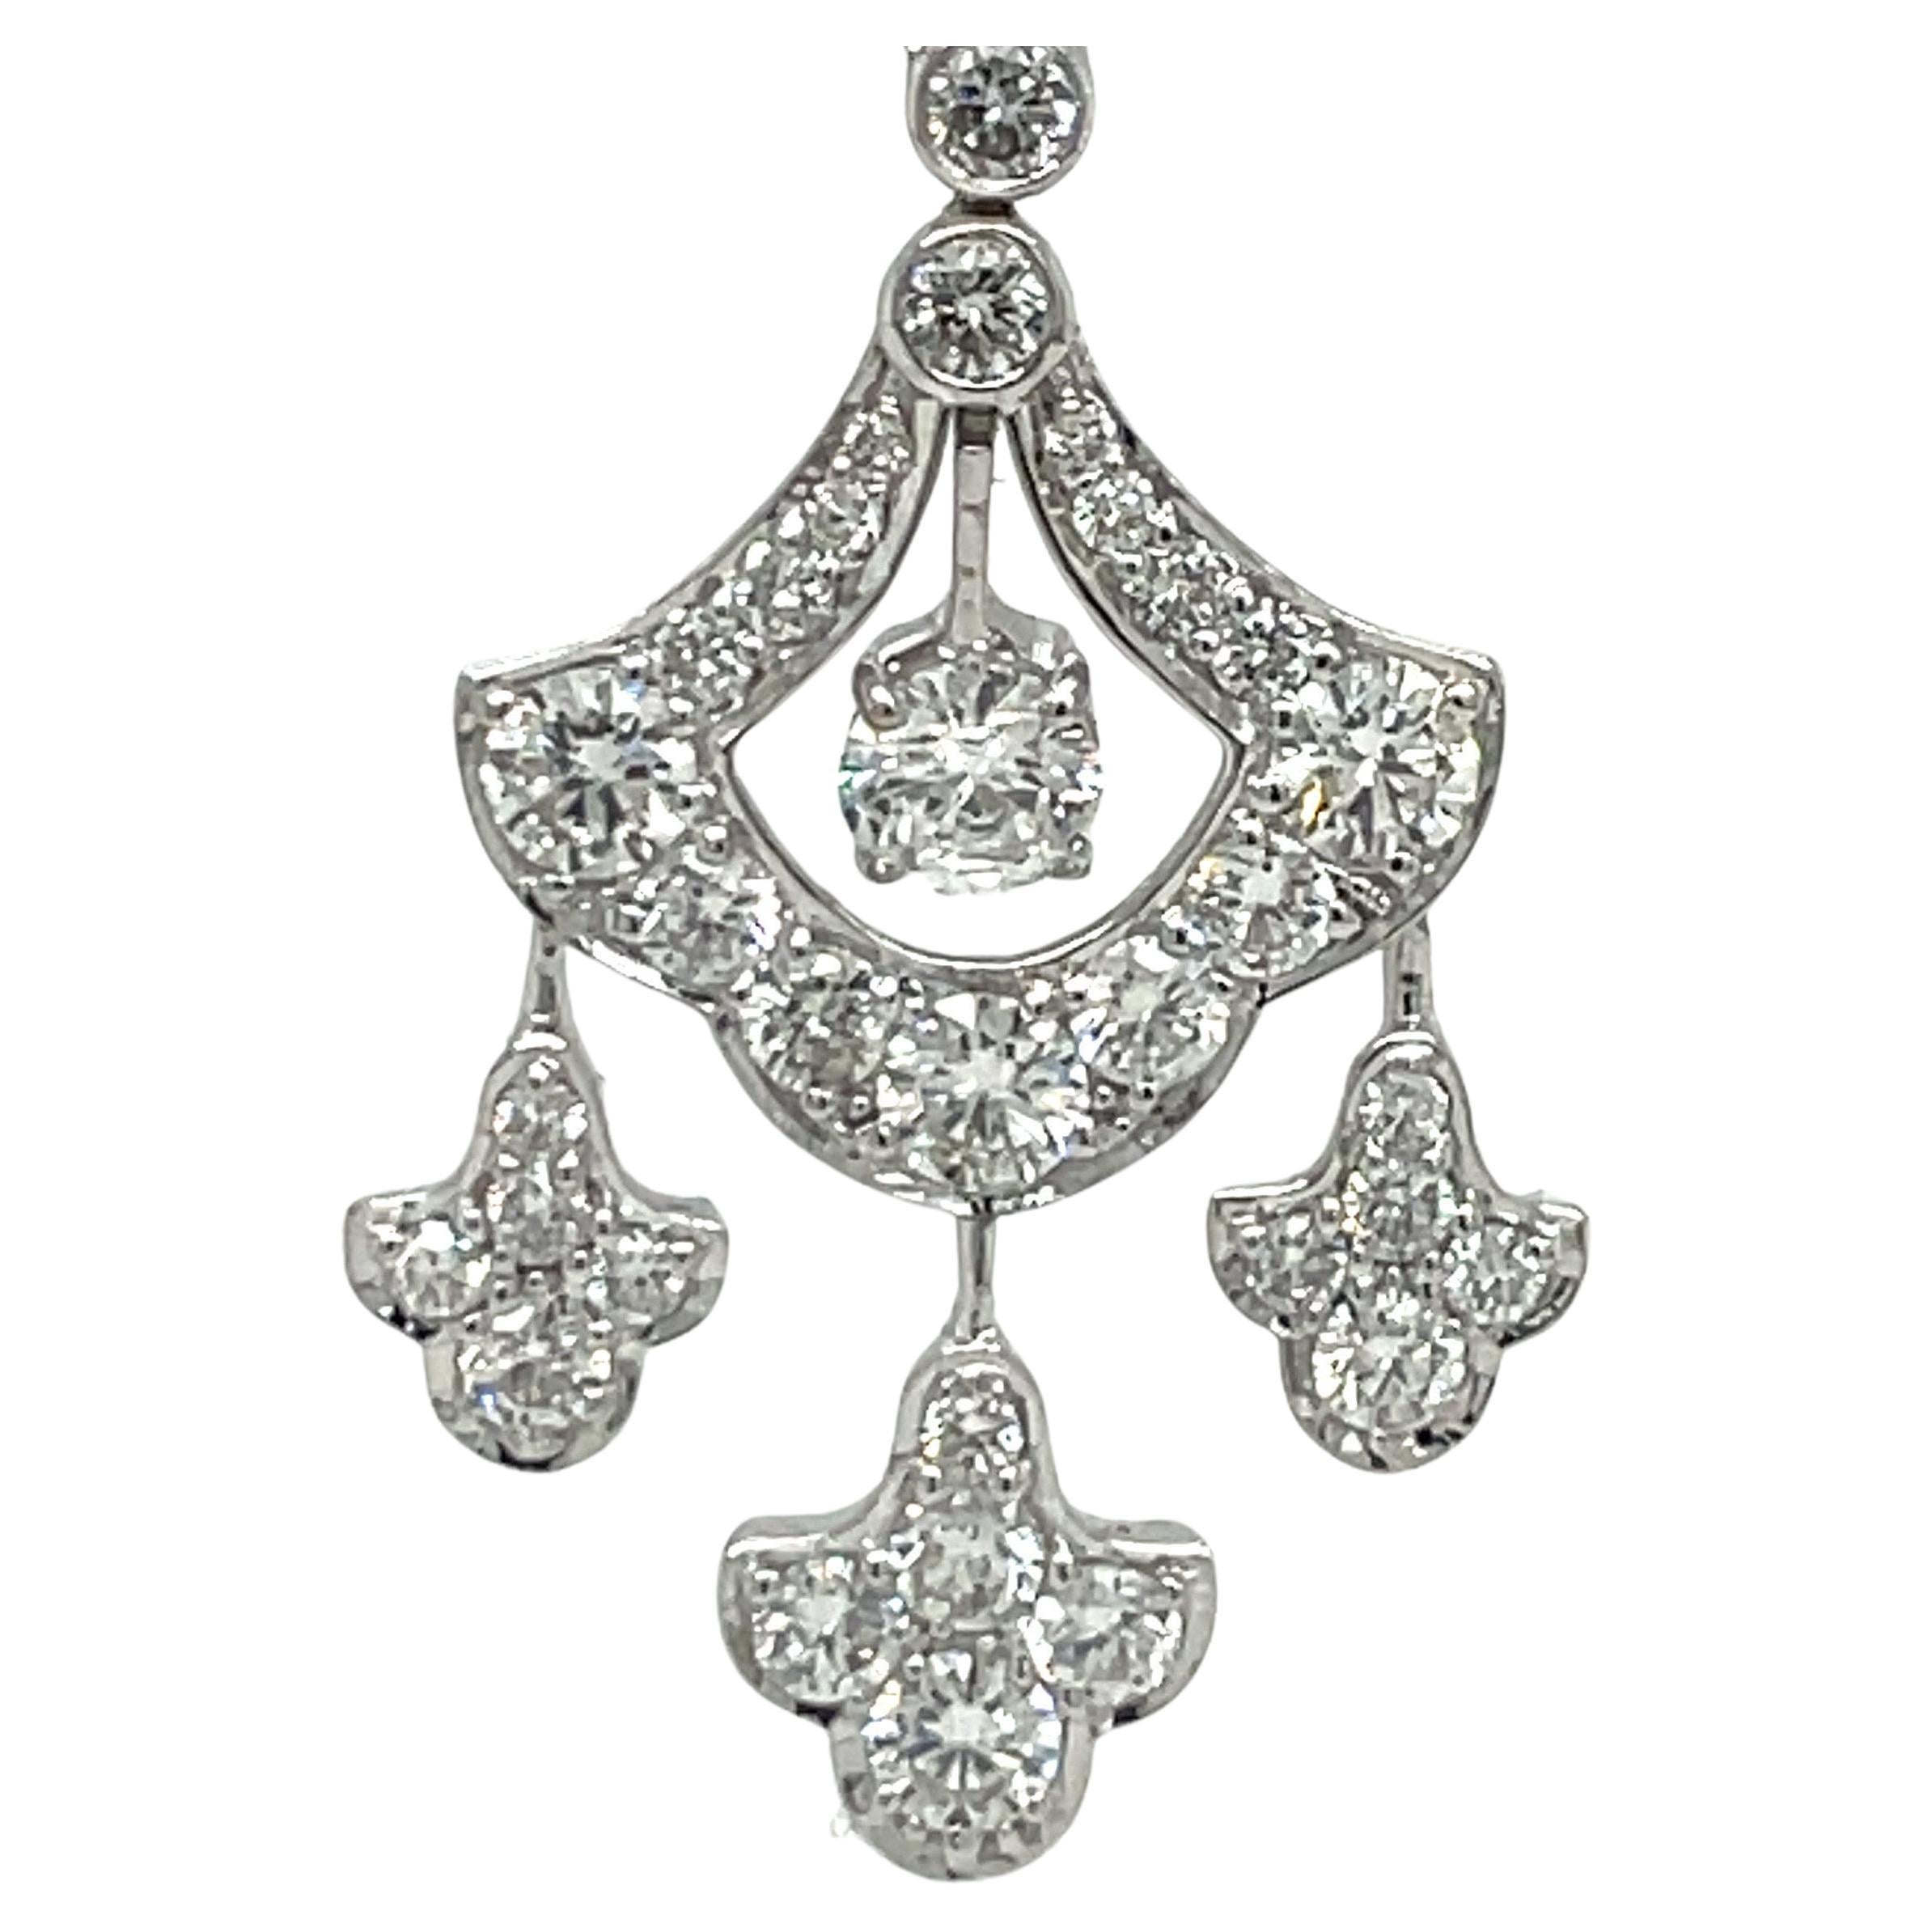 18 Karat White Gold Drop Dangle Diamond Earrings 3.98 Carats In New Condition For Sale In New York, NY